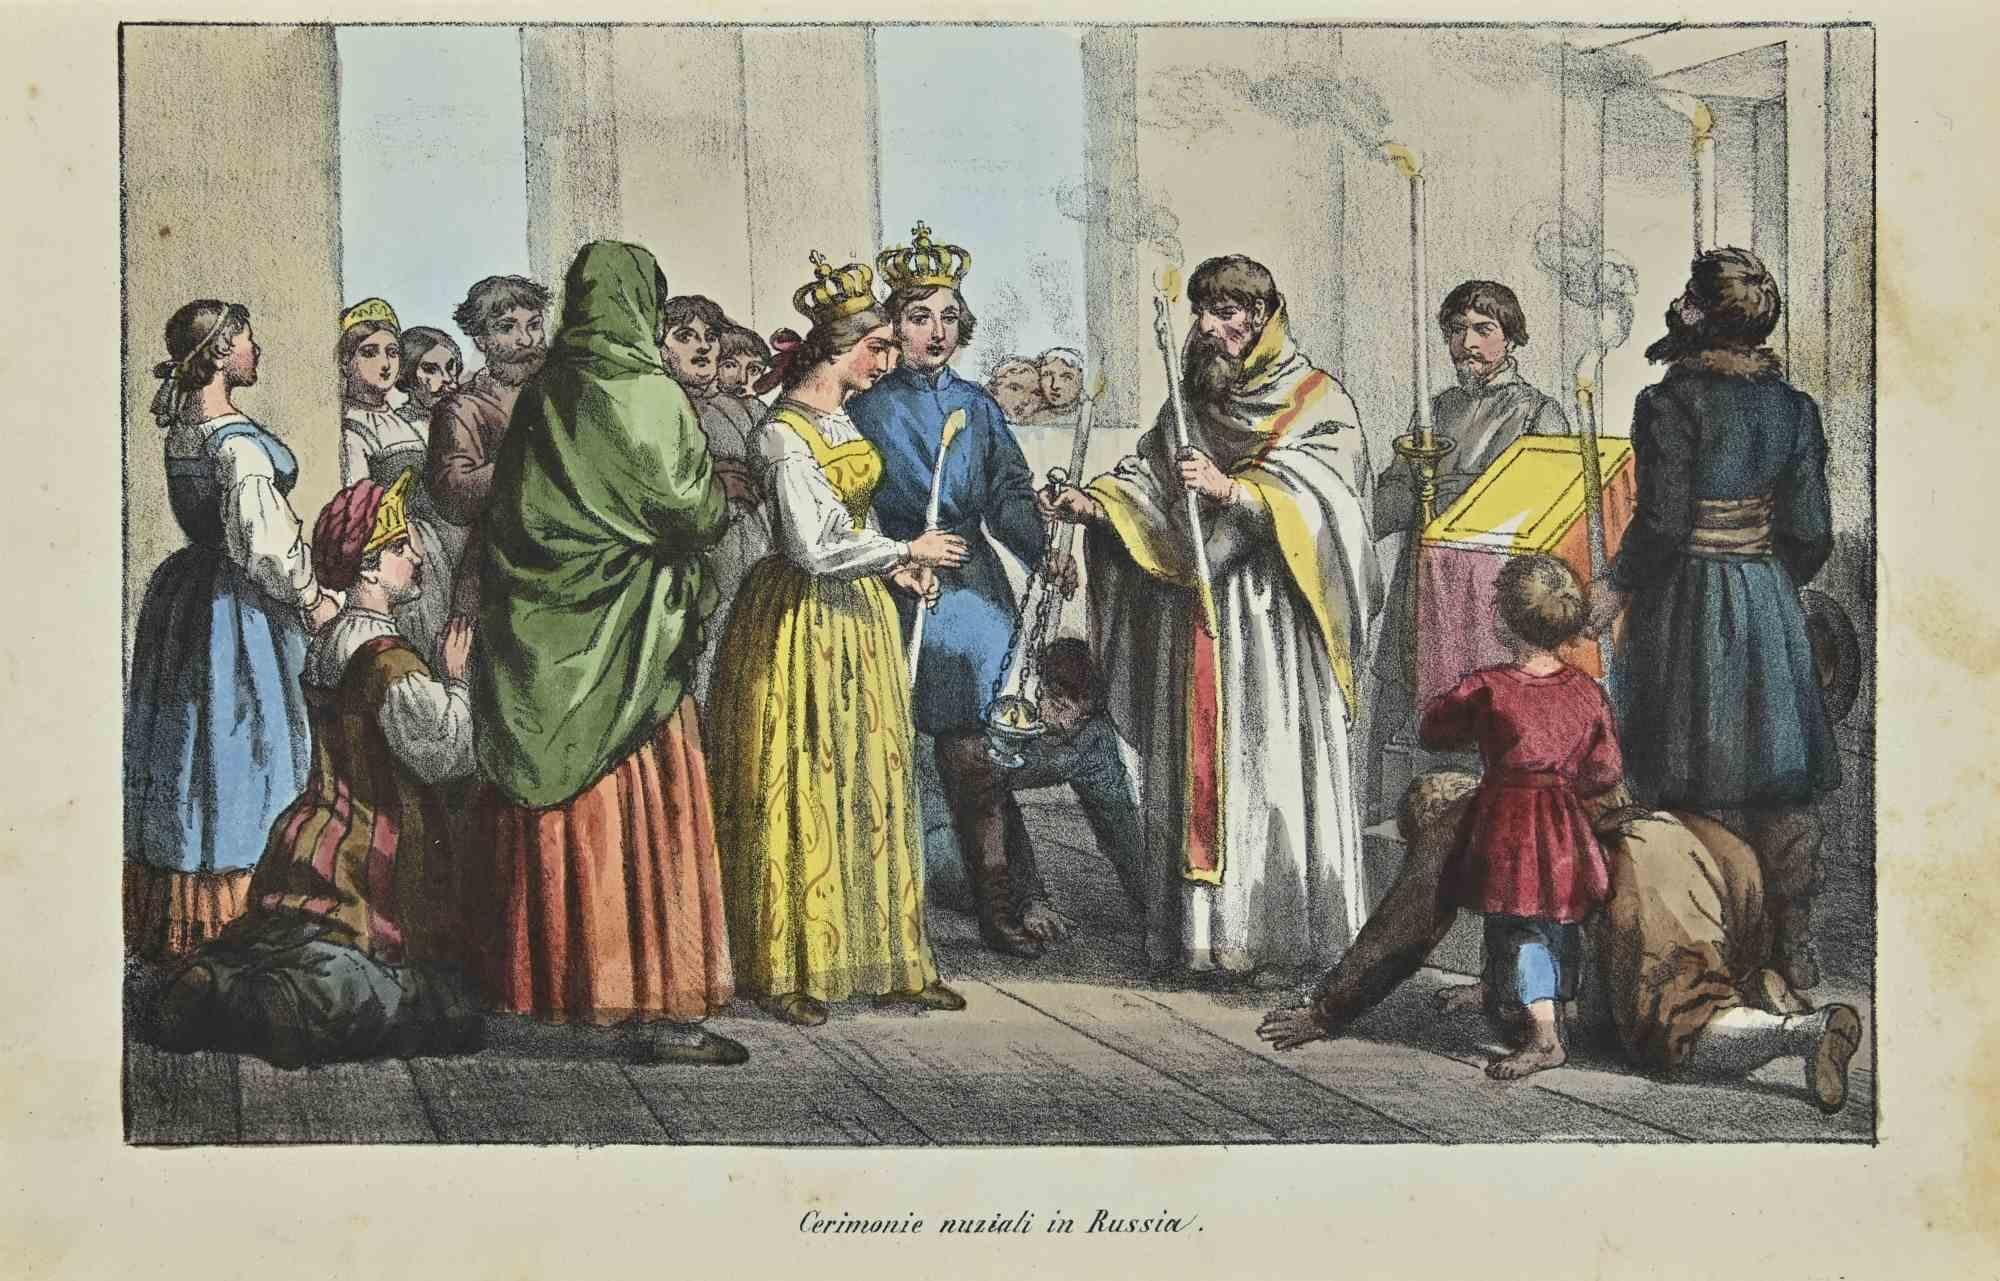 Various Artists Figurative Print - Uses and Customs - Ceremony of Marriage in Russia - Lithograph - 1862